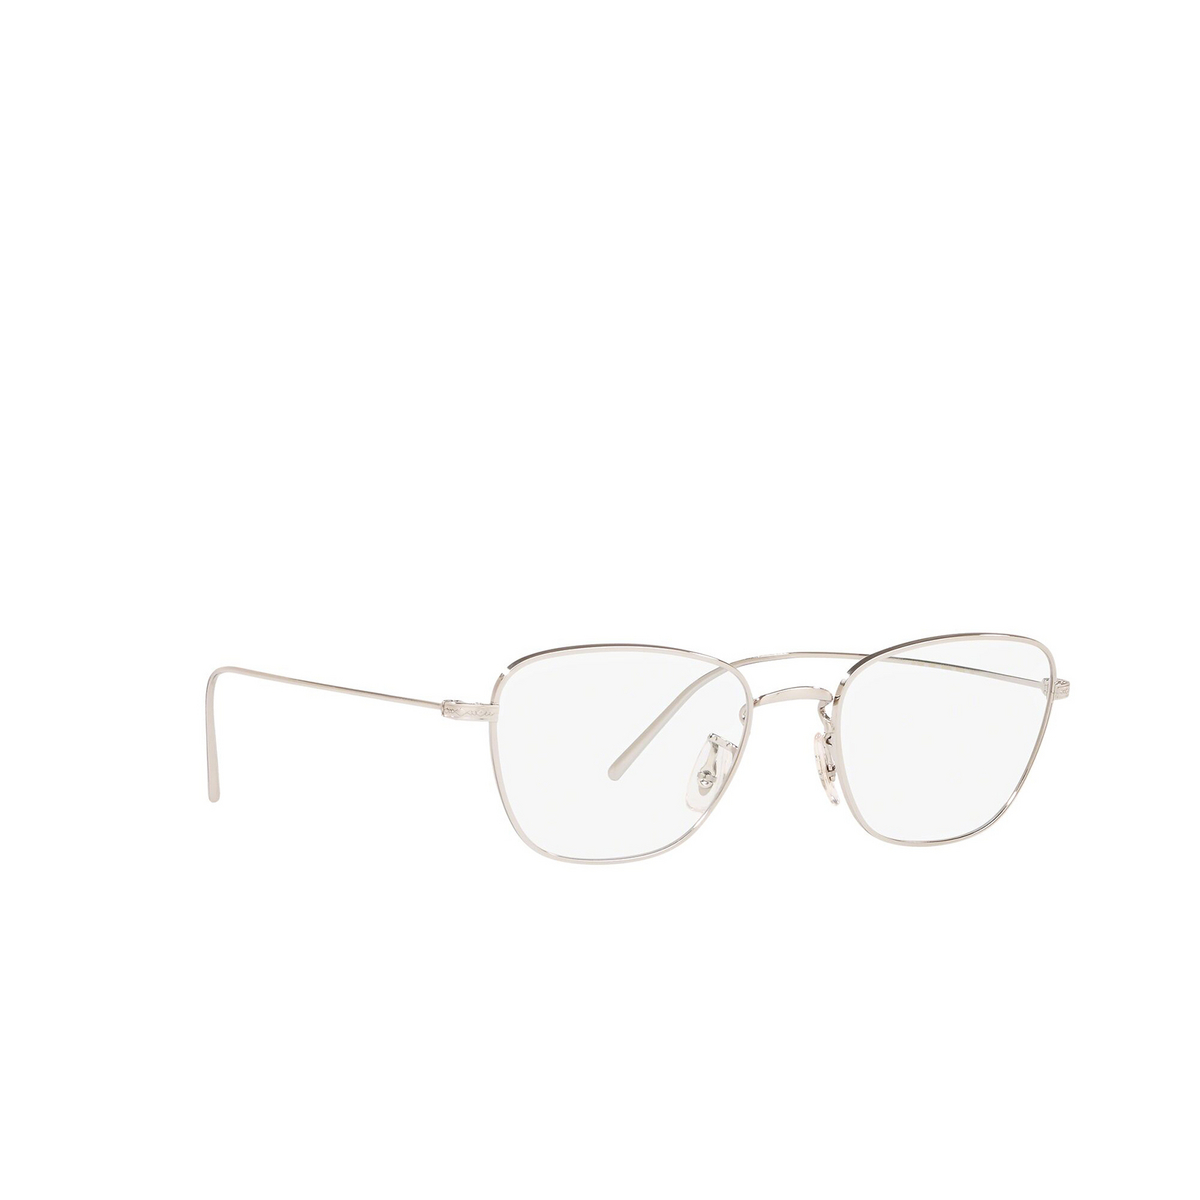 Oliver Peoples SULIANE Eyeglasses 5036 Silver - three-quarters view